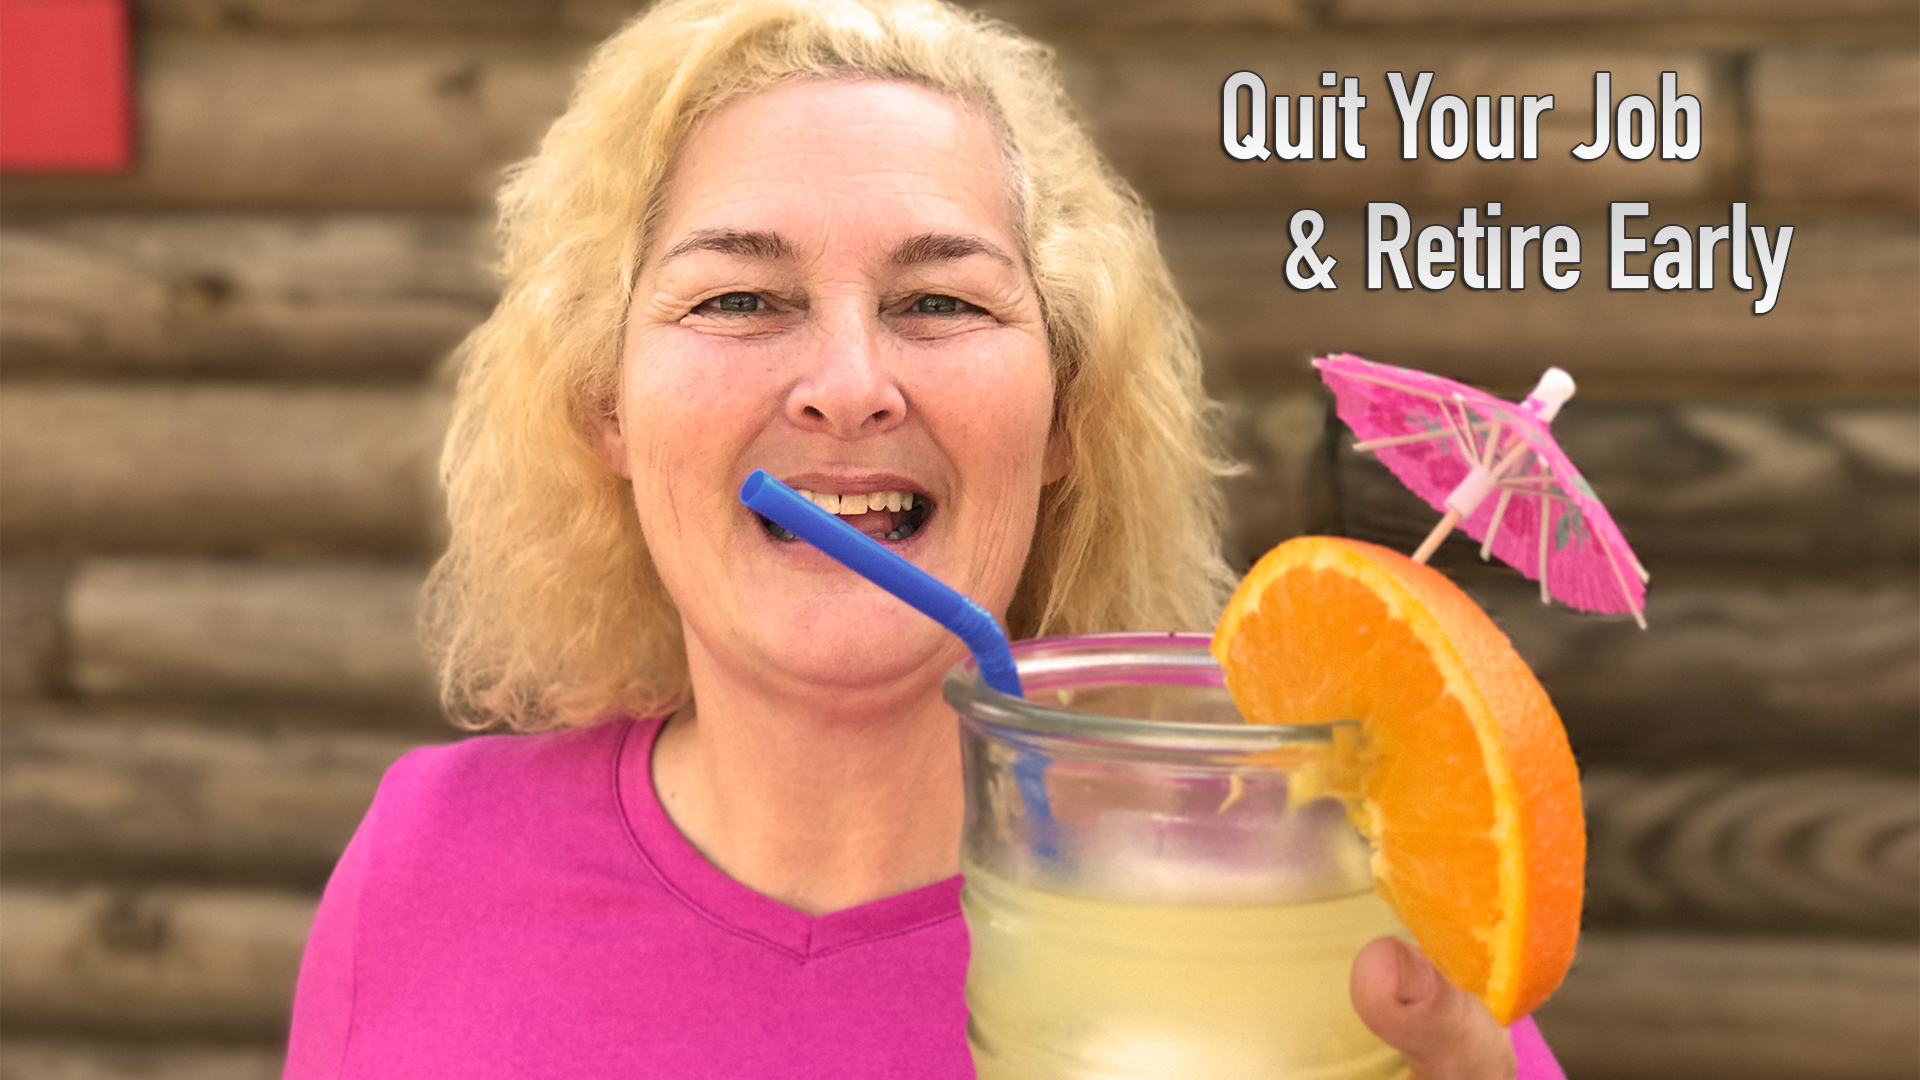 How To Quit Your Job & Retire Early